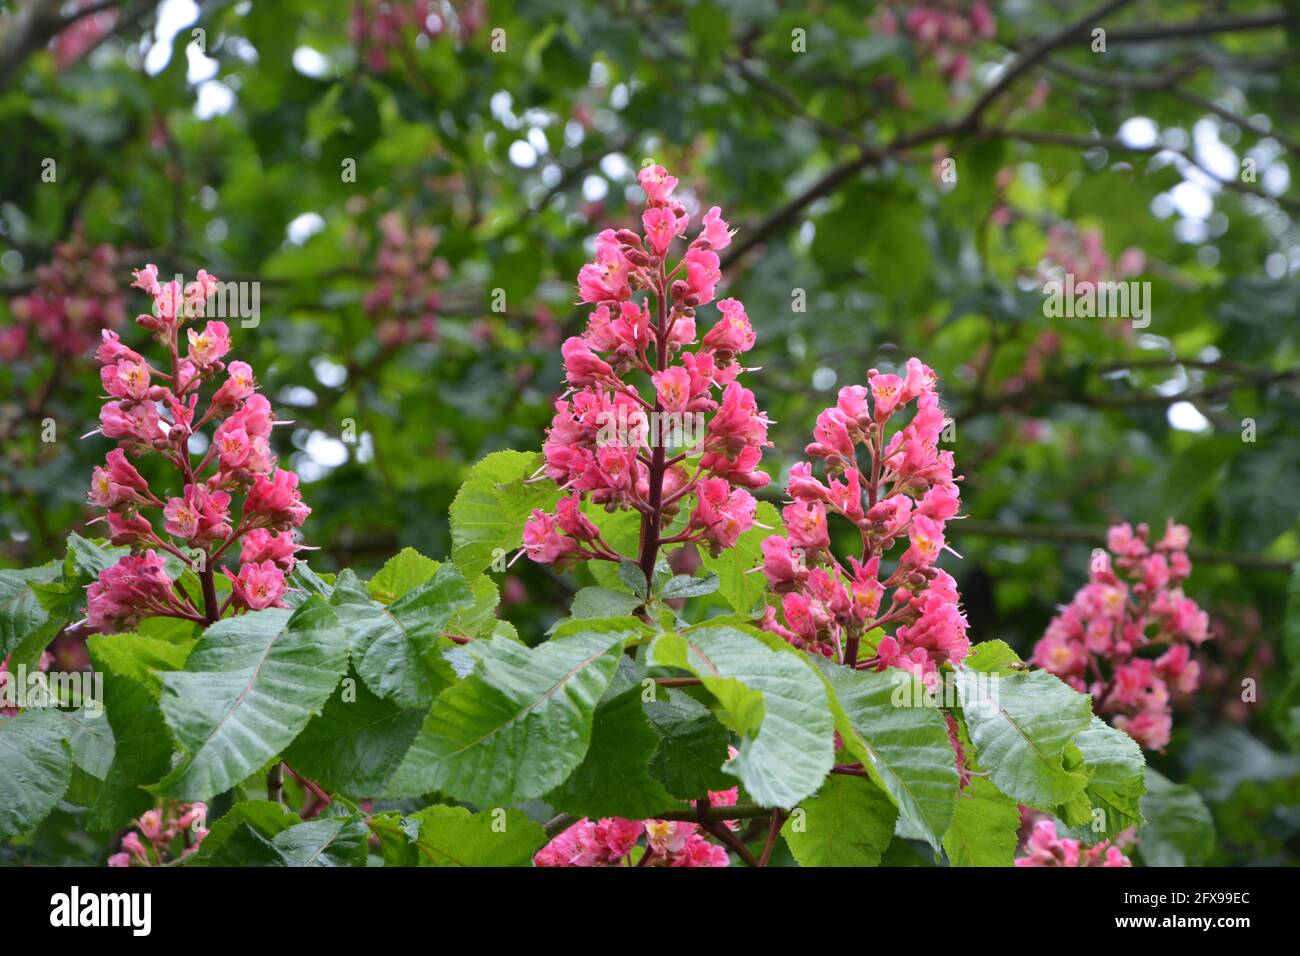 Red Horse Chestnut Tree, Red Horse-Chestnut Free, Aesculus Hippocastanum UK Close UP Stock Photo